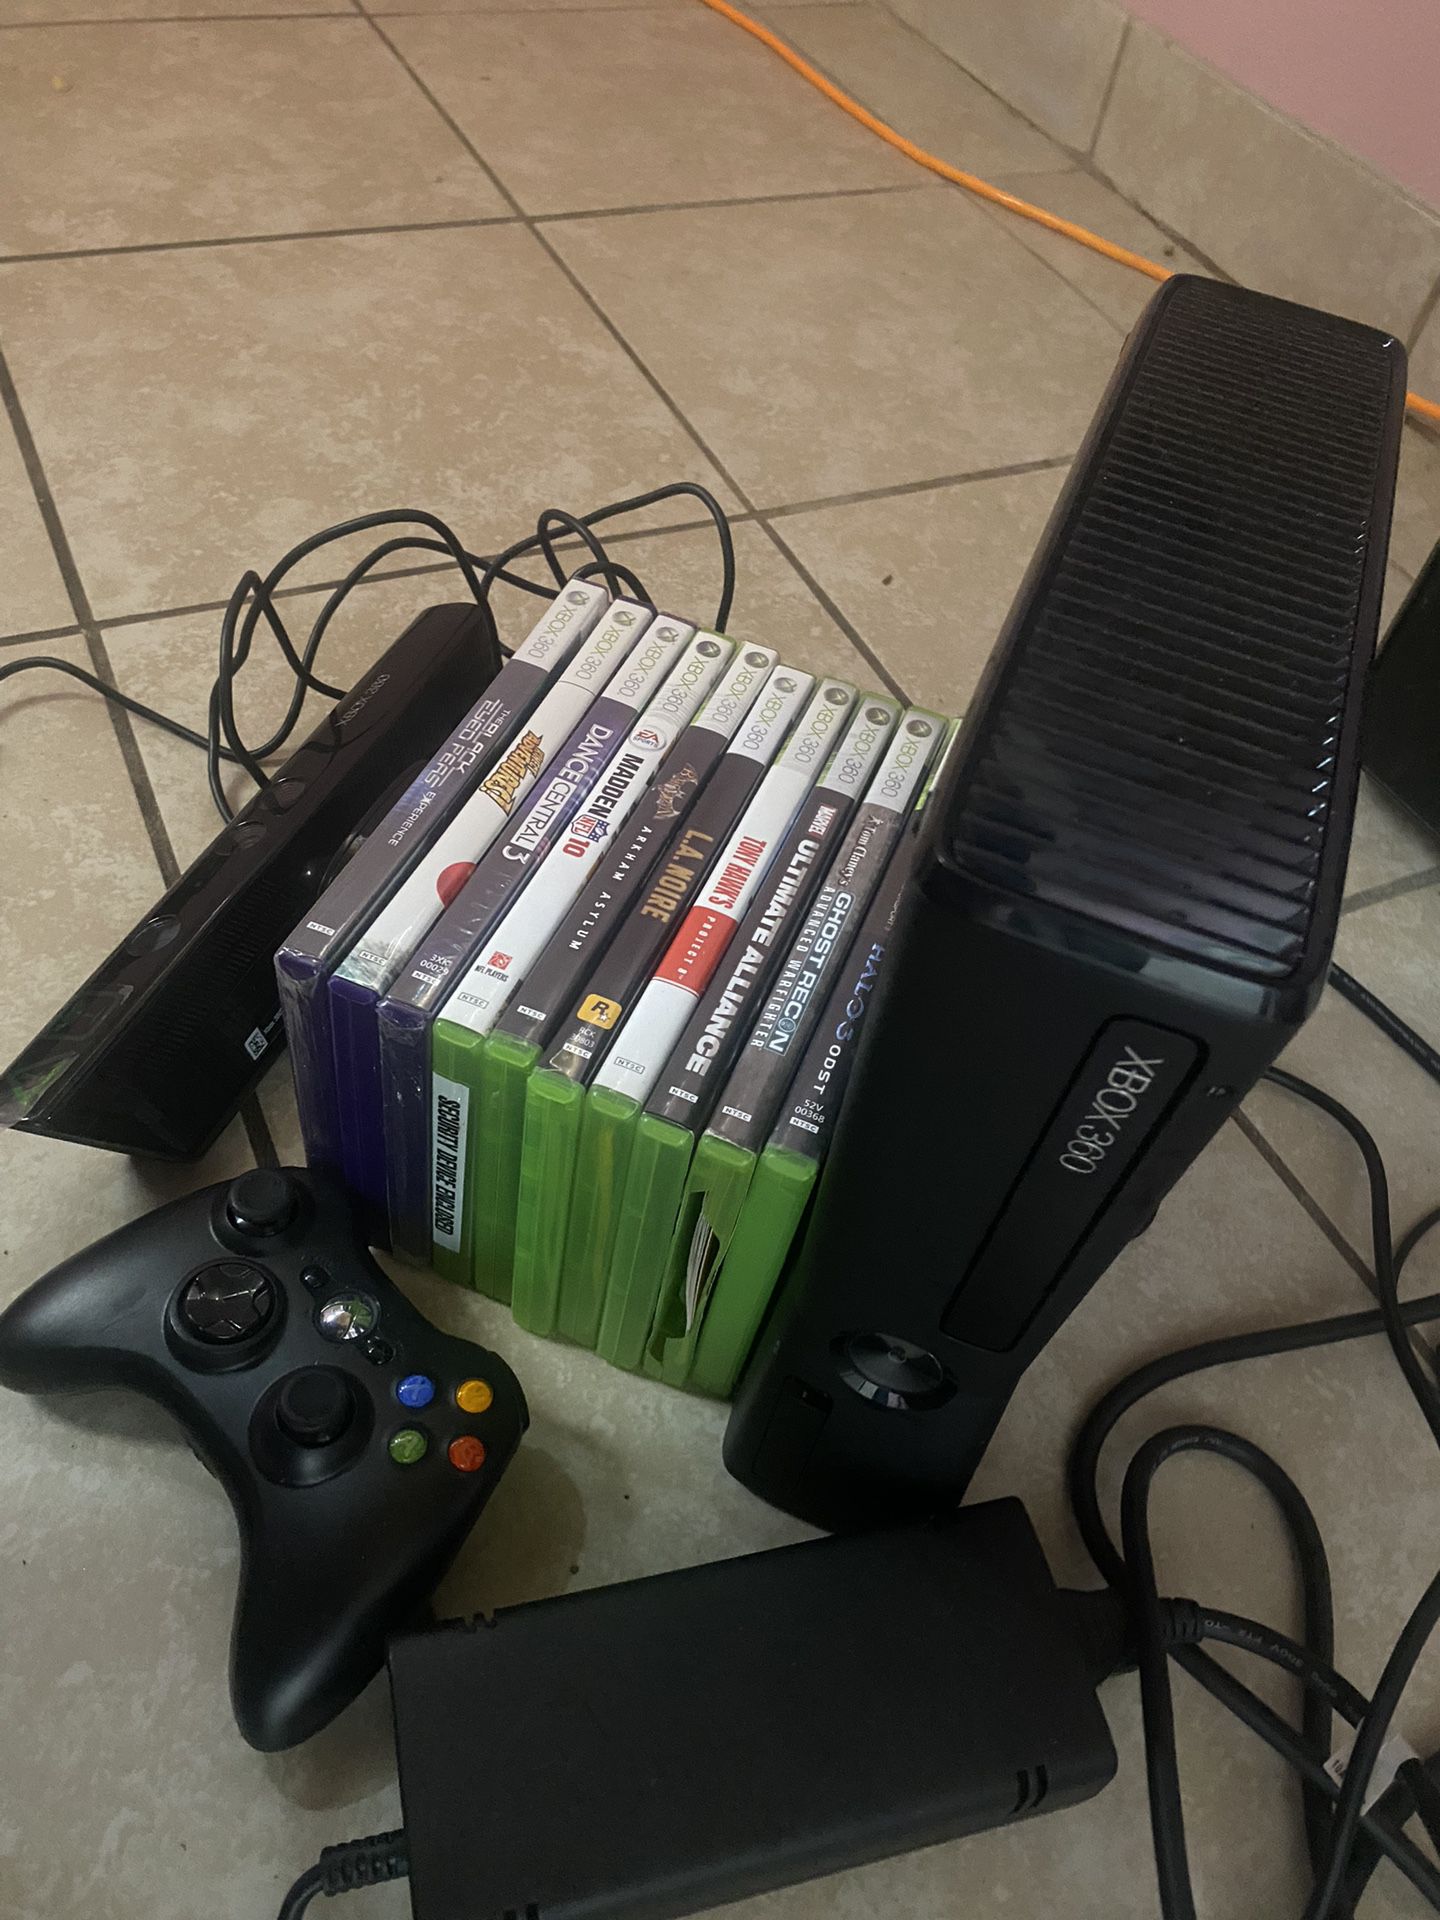 XBOX 360 with Everything You Need/Want